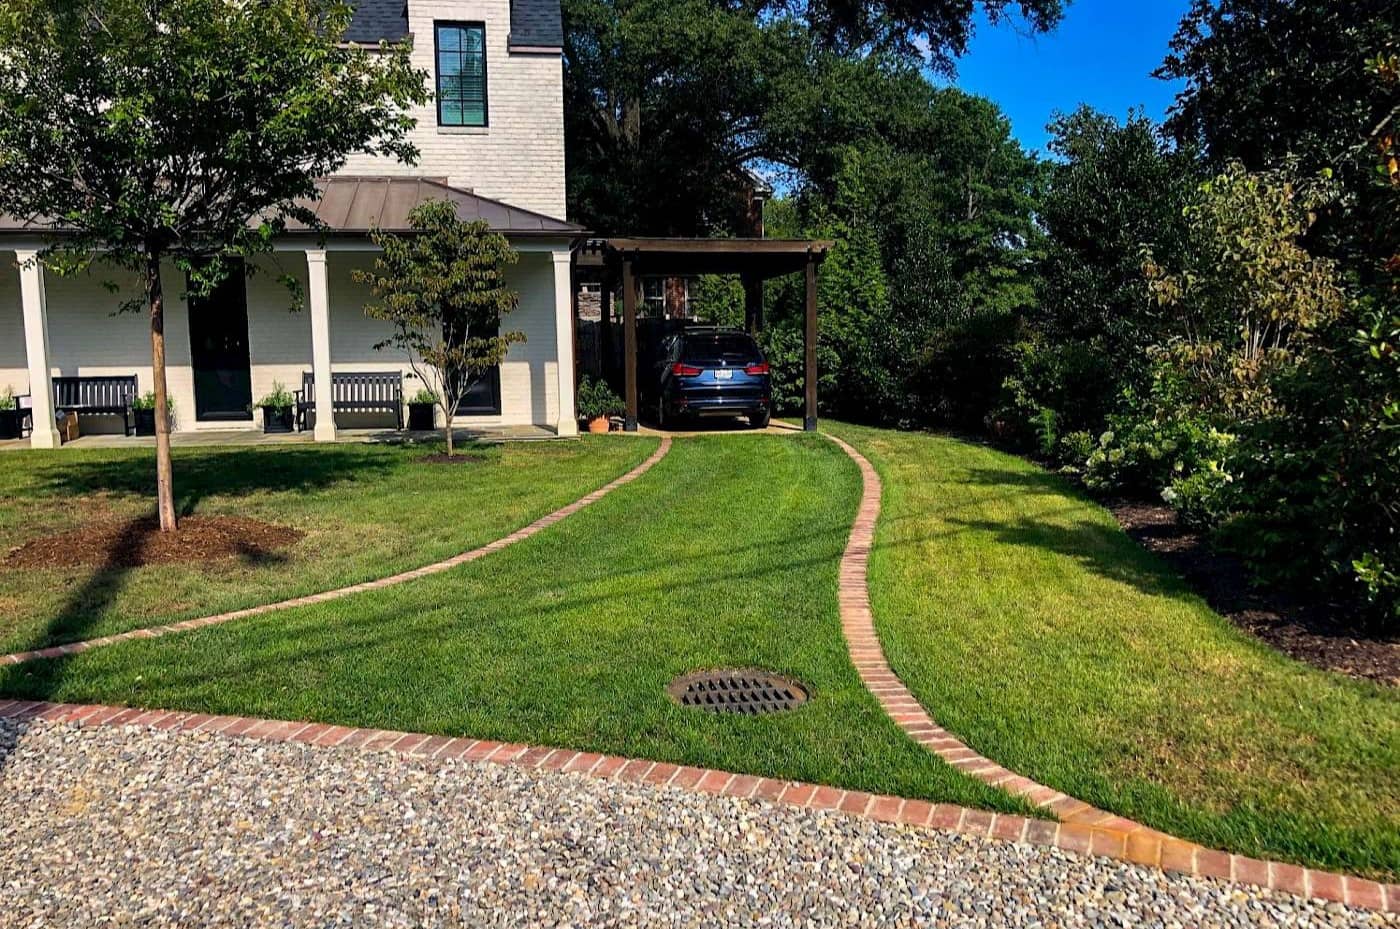 How To Get Rid Of Grass In Gravel Driveway